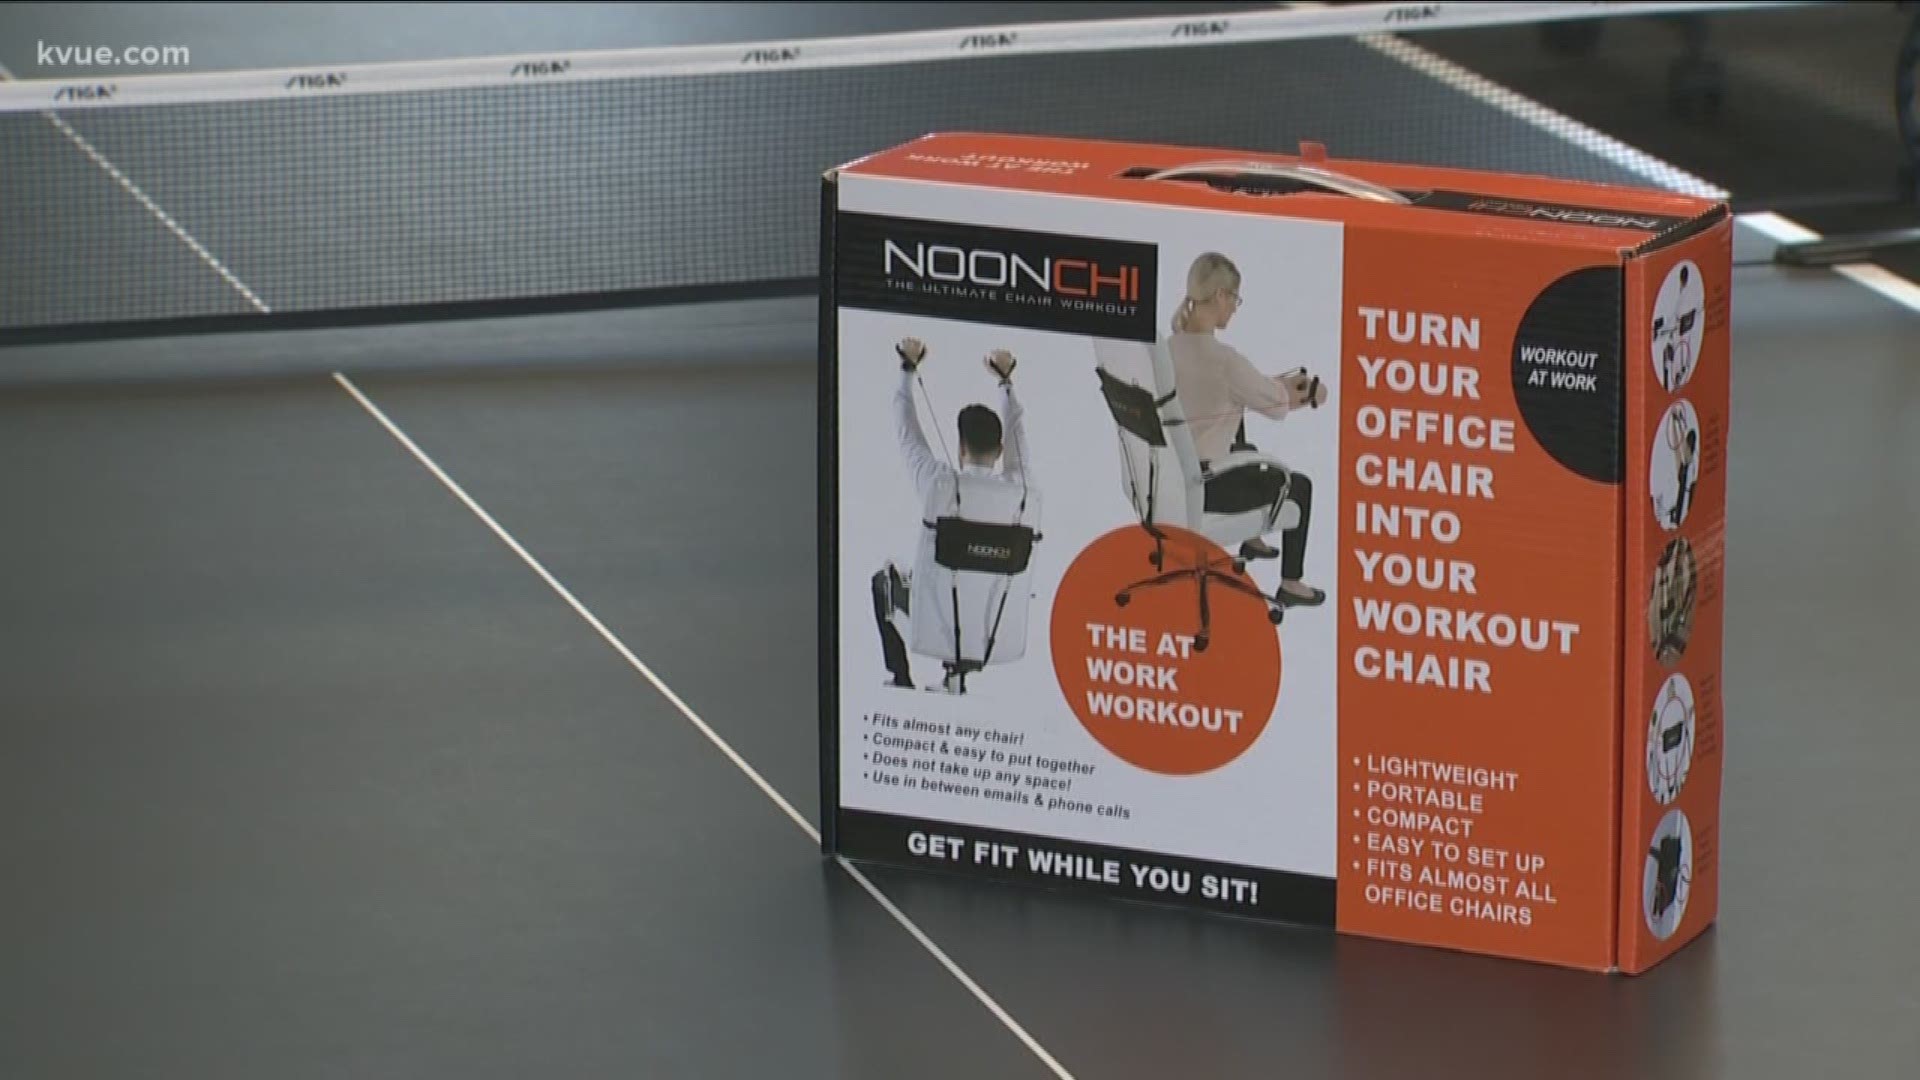 This product claims it will help you get fit while you sit!